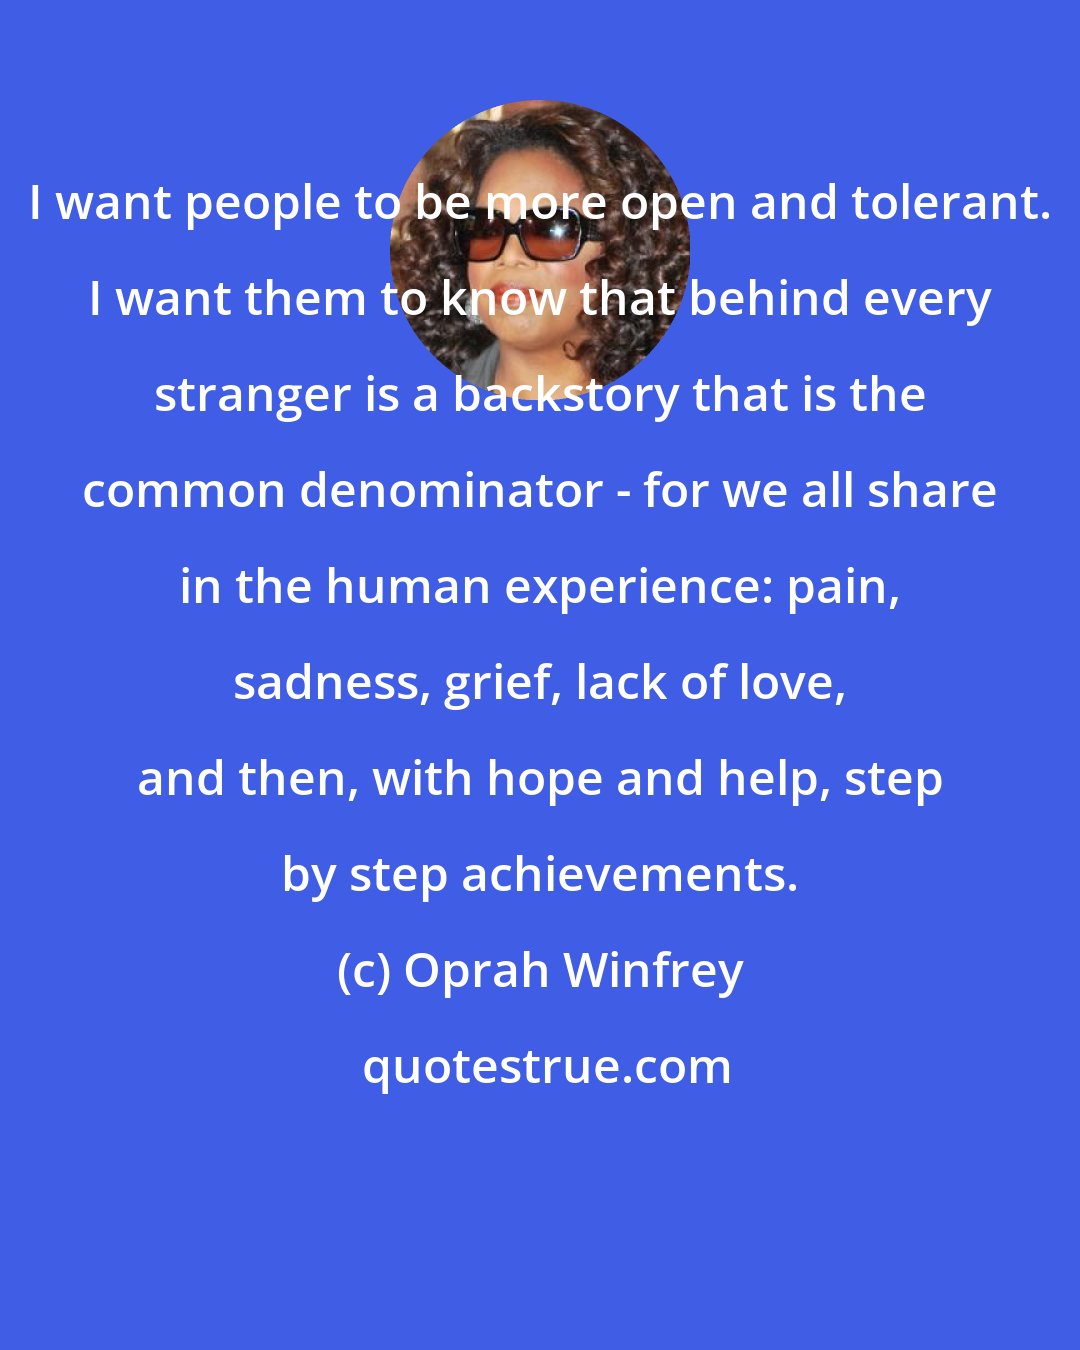 Oprah Winfrey: I want people to be more open and tolerant. I want them to know that behind every stranger is a backstory that is the common denominator - for we all share in the human experience: pain, sadness, grief, lack of love, and then, with hope and help, step by step achievements.